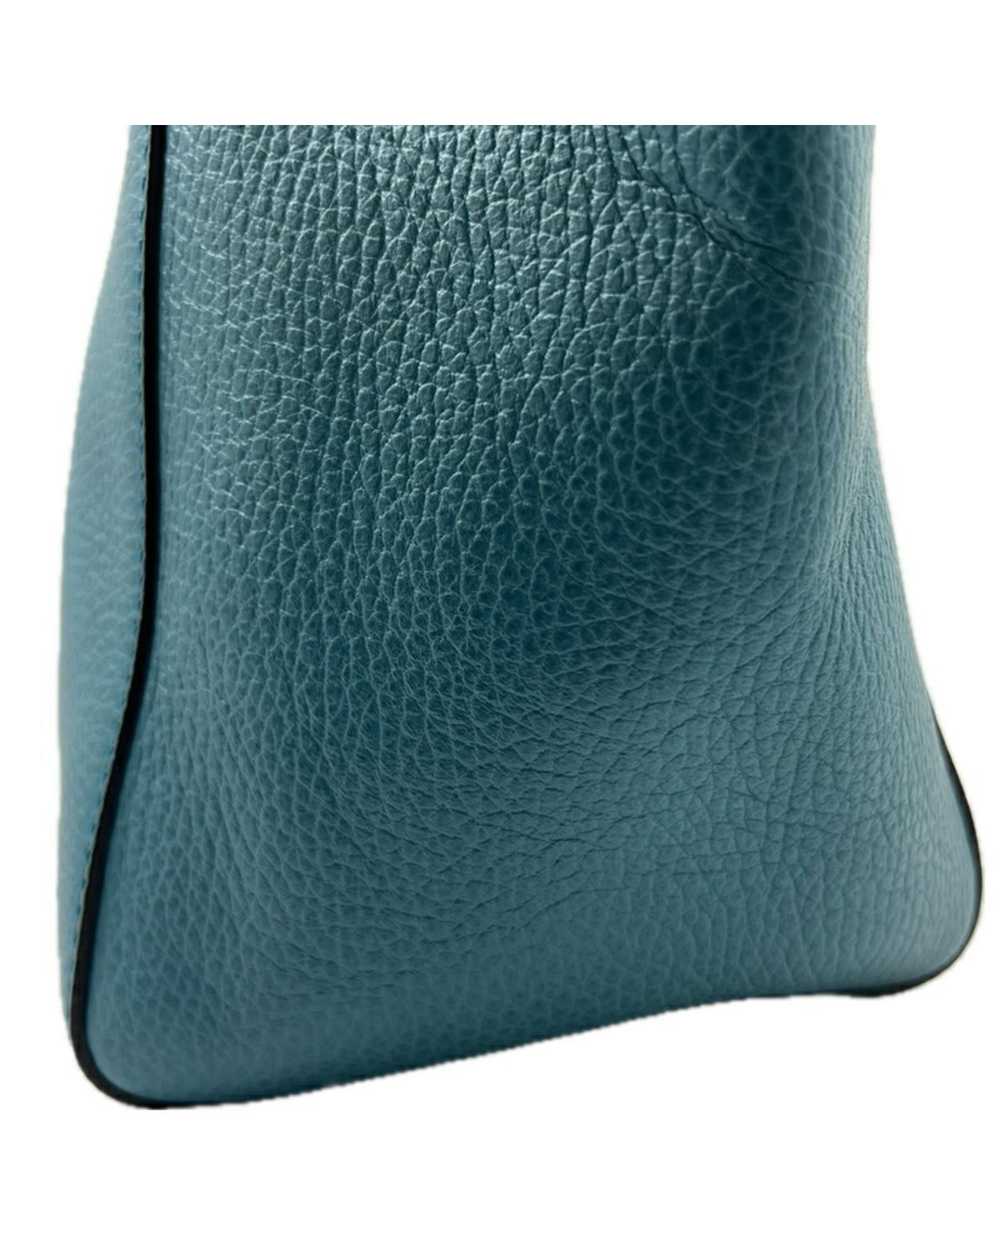 Gucci Blue Leather Swing Bag - image 3